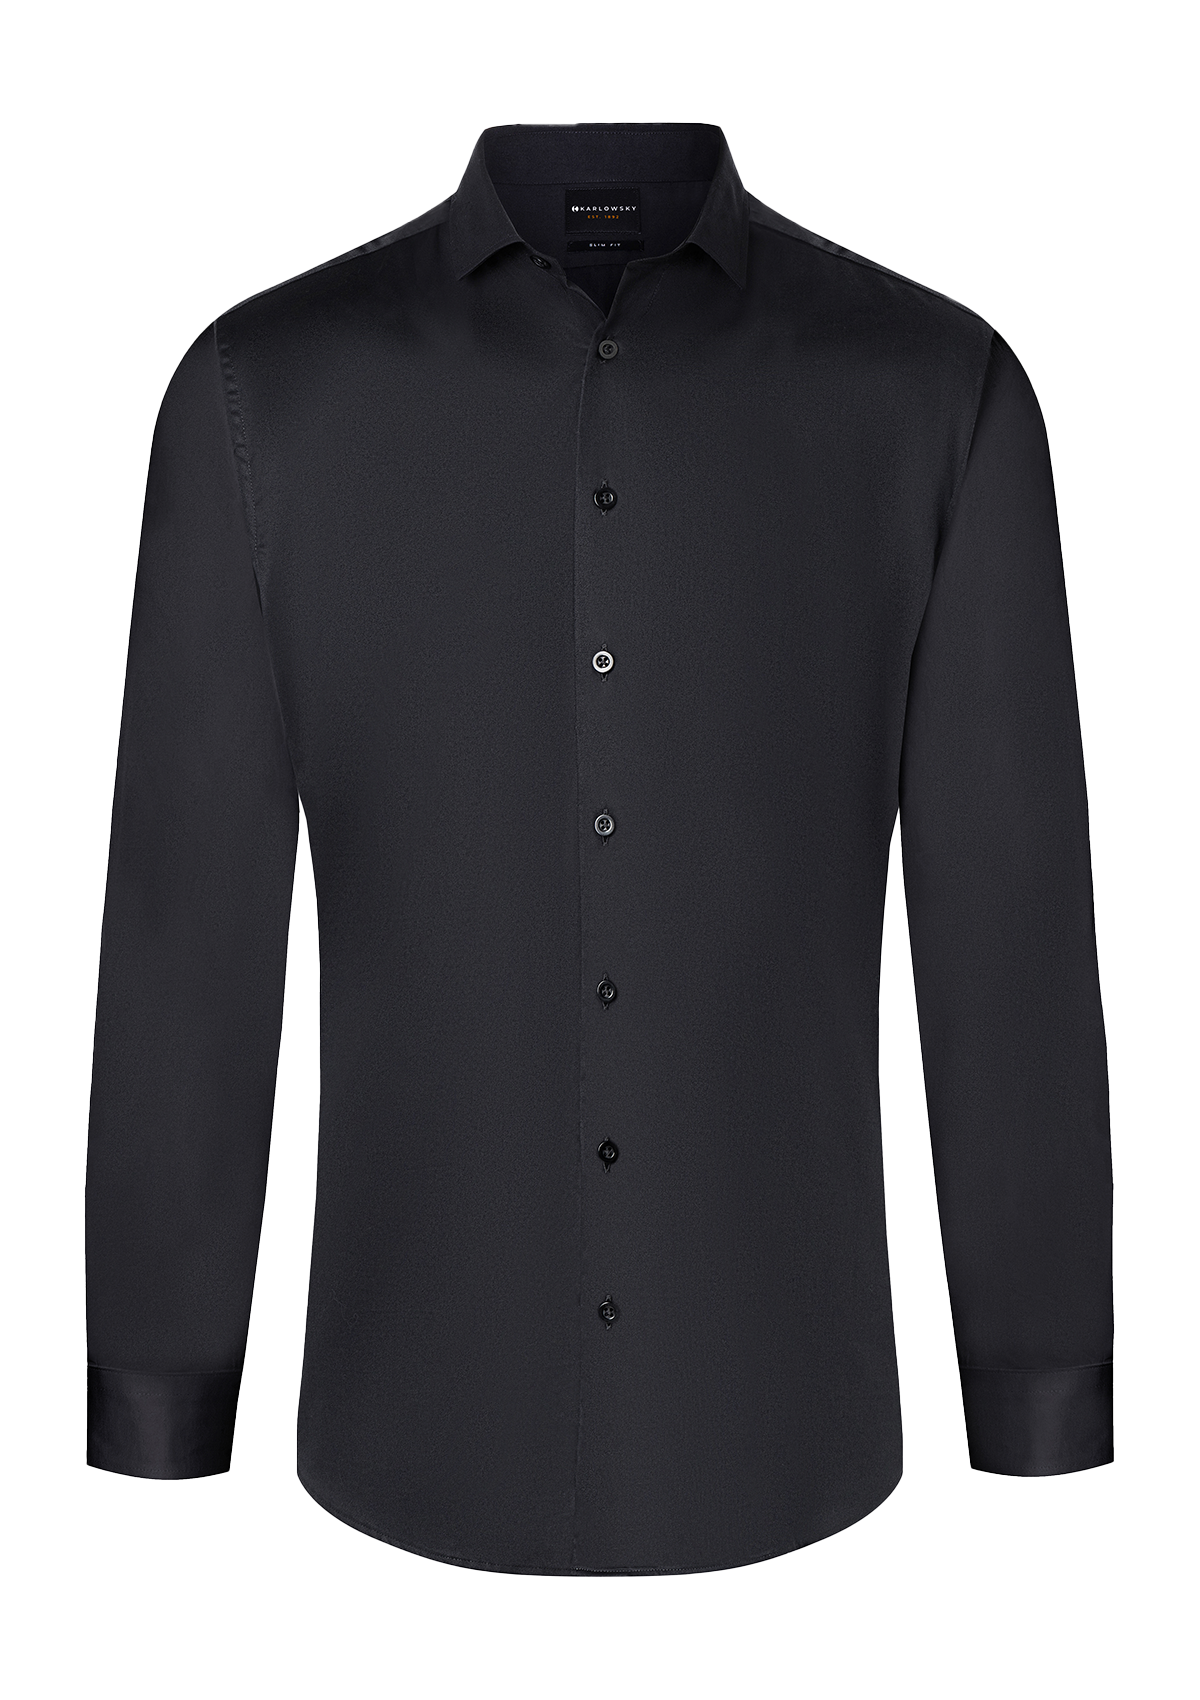 Men's Shirt Active-Stretch Long Sleeves Slim-Fit